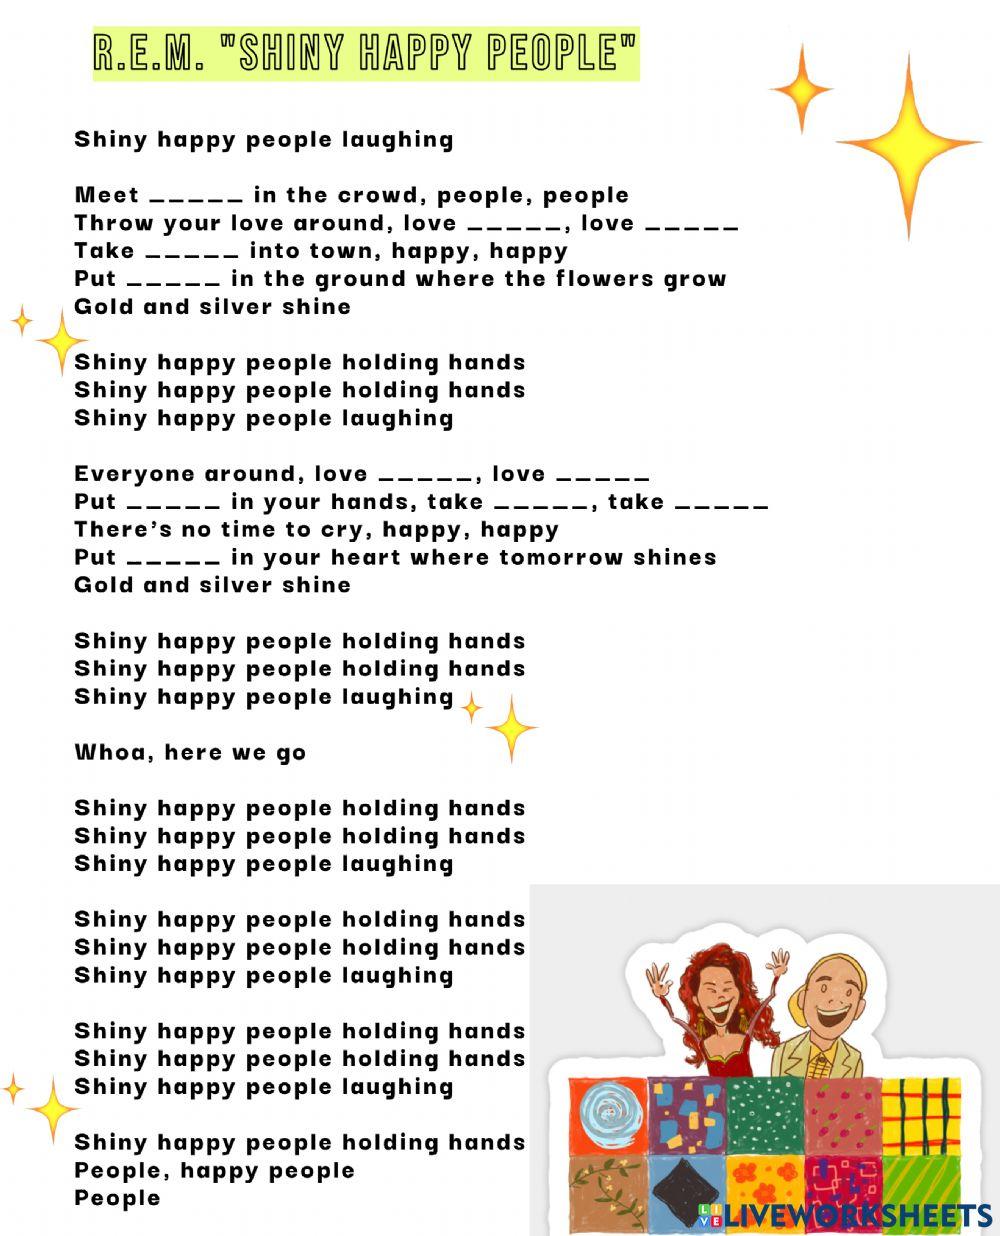 Song: Shiny happy people